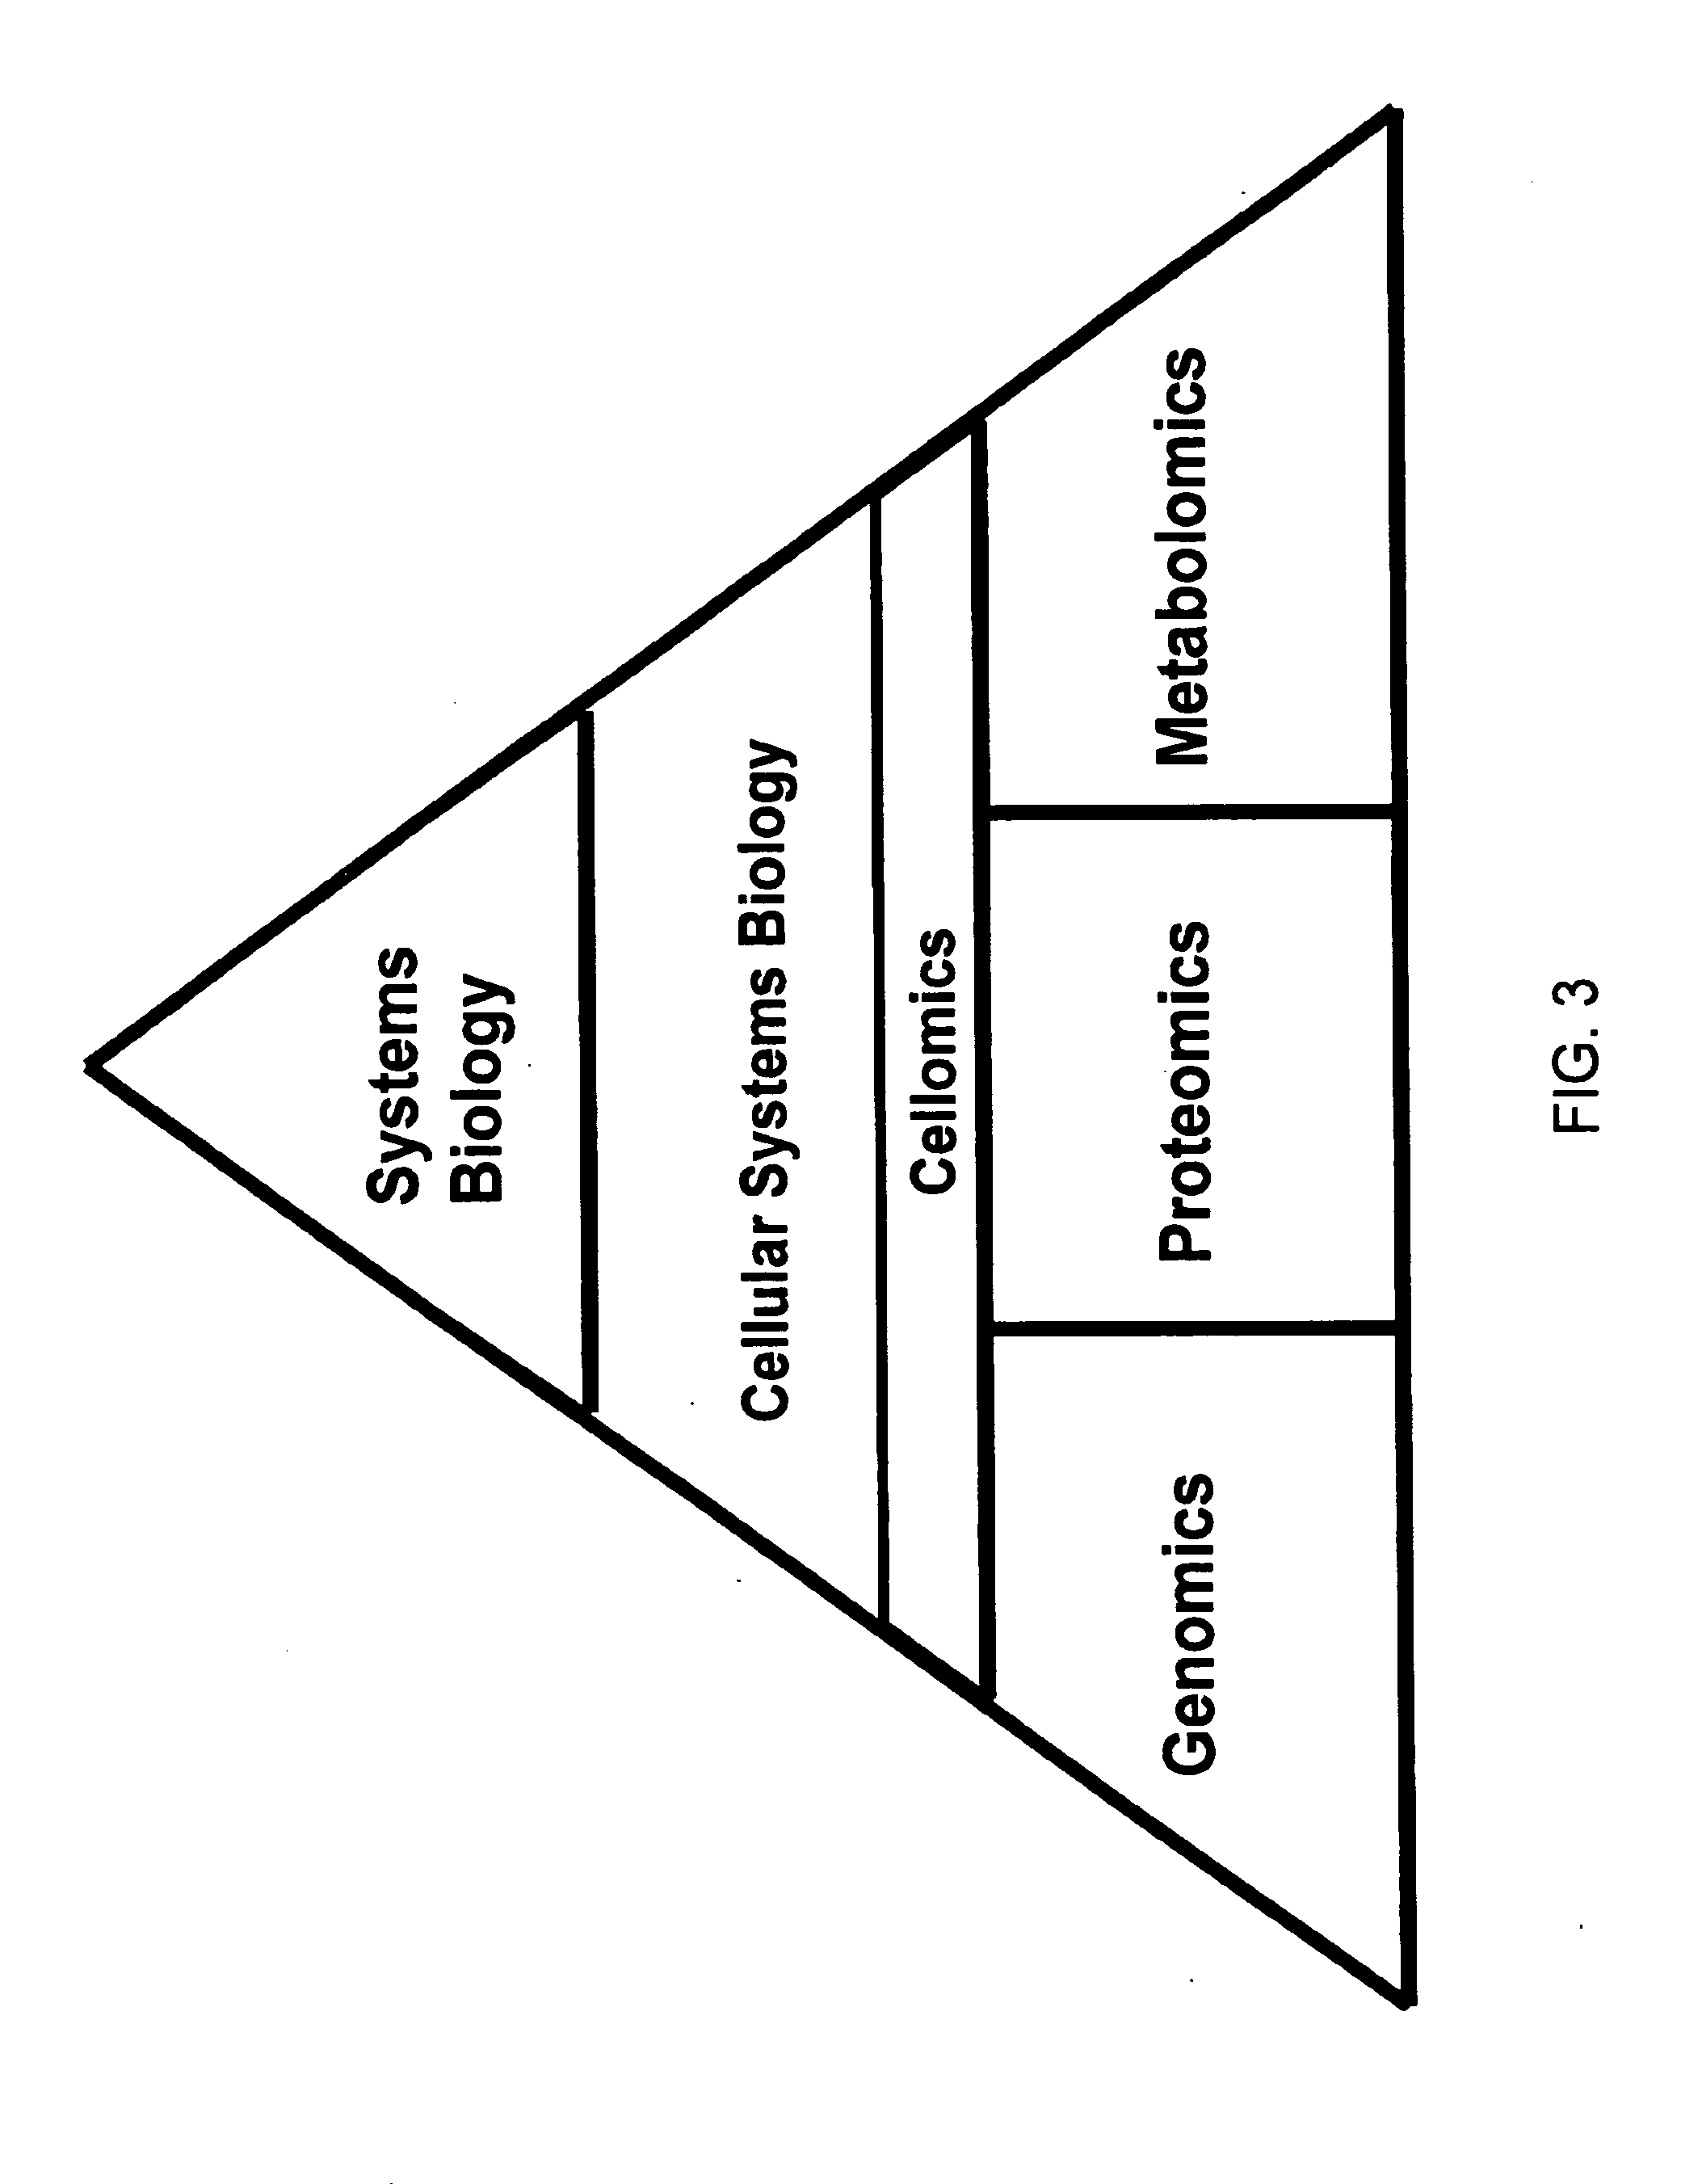 Method for Automated Tissue Analysis